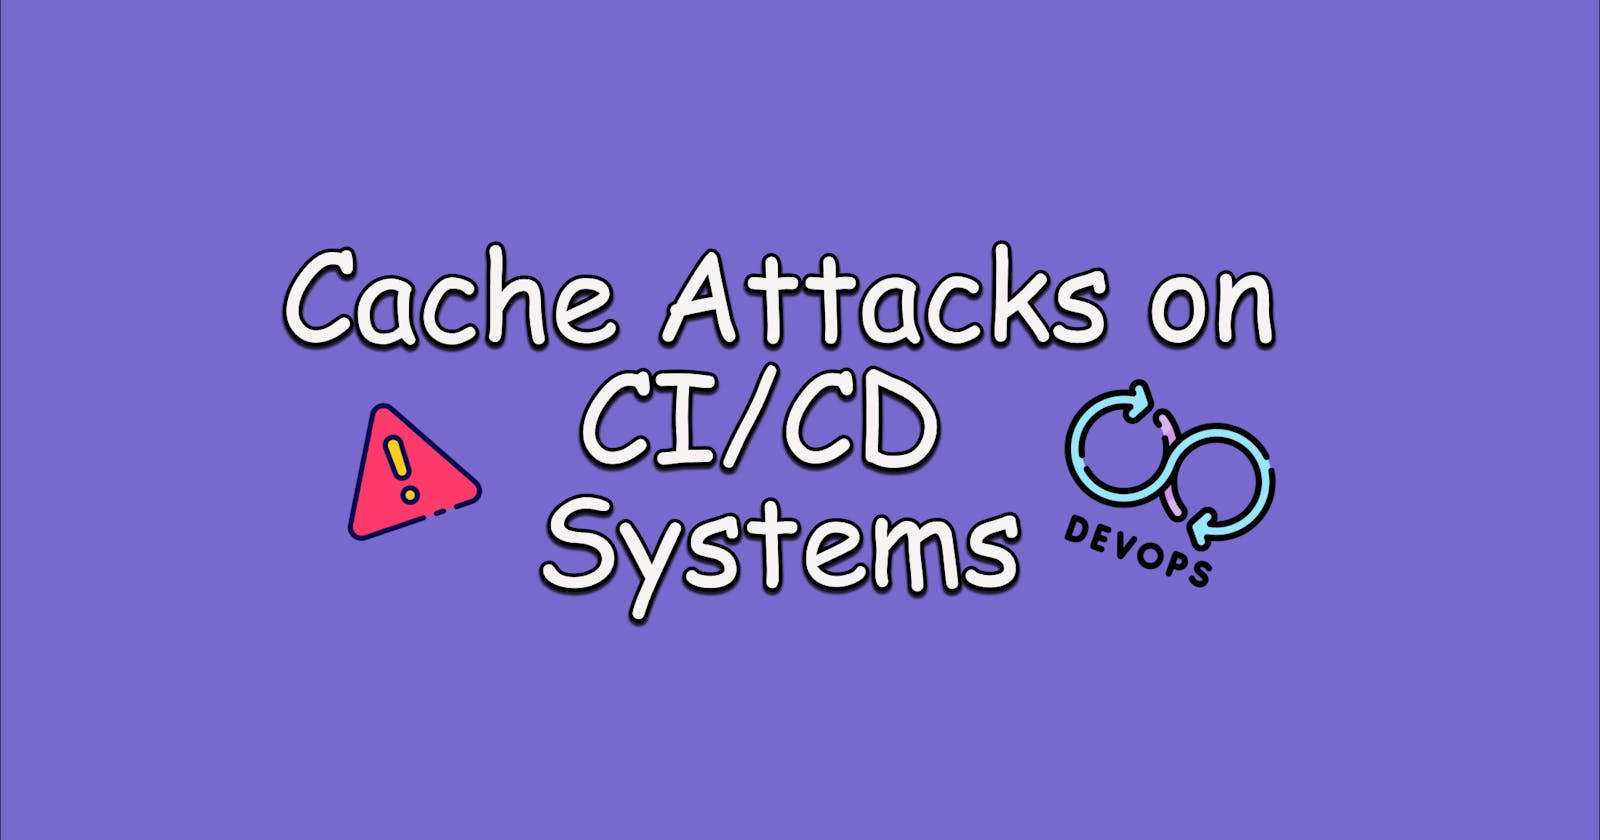 Cache Attacks on CI/CD Systems